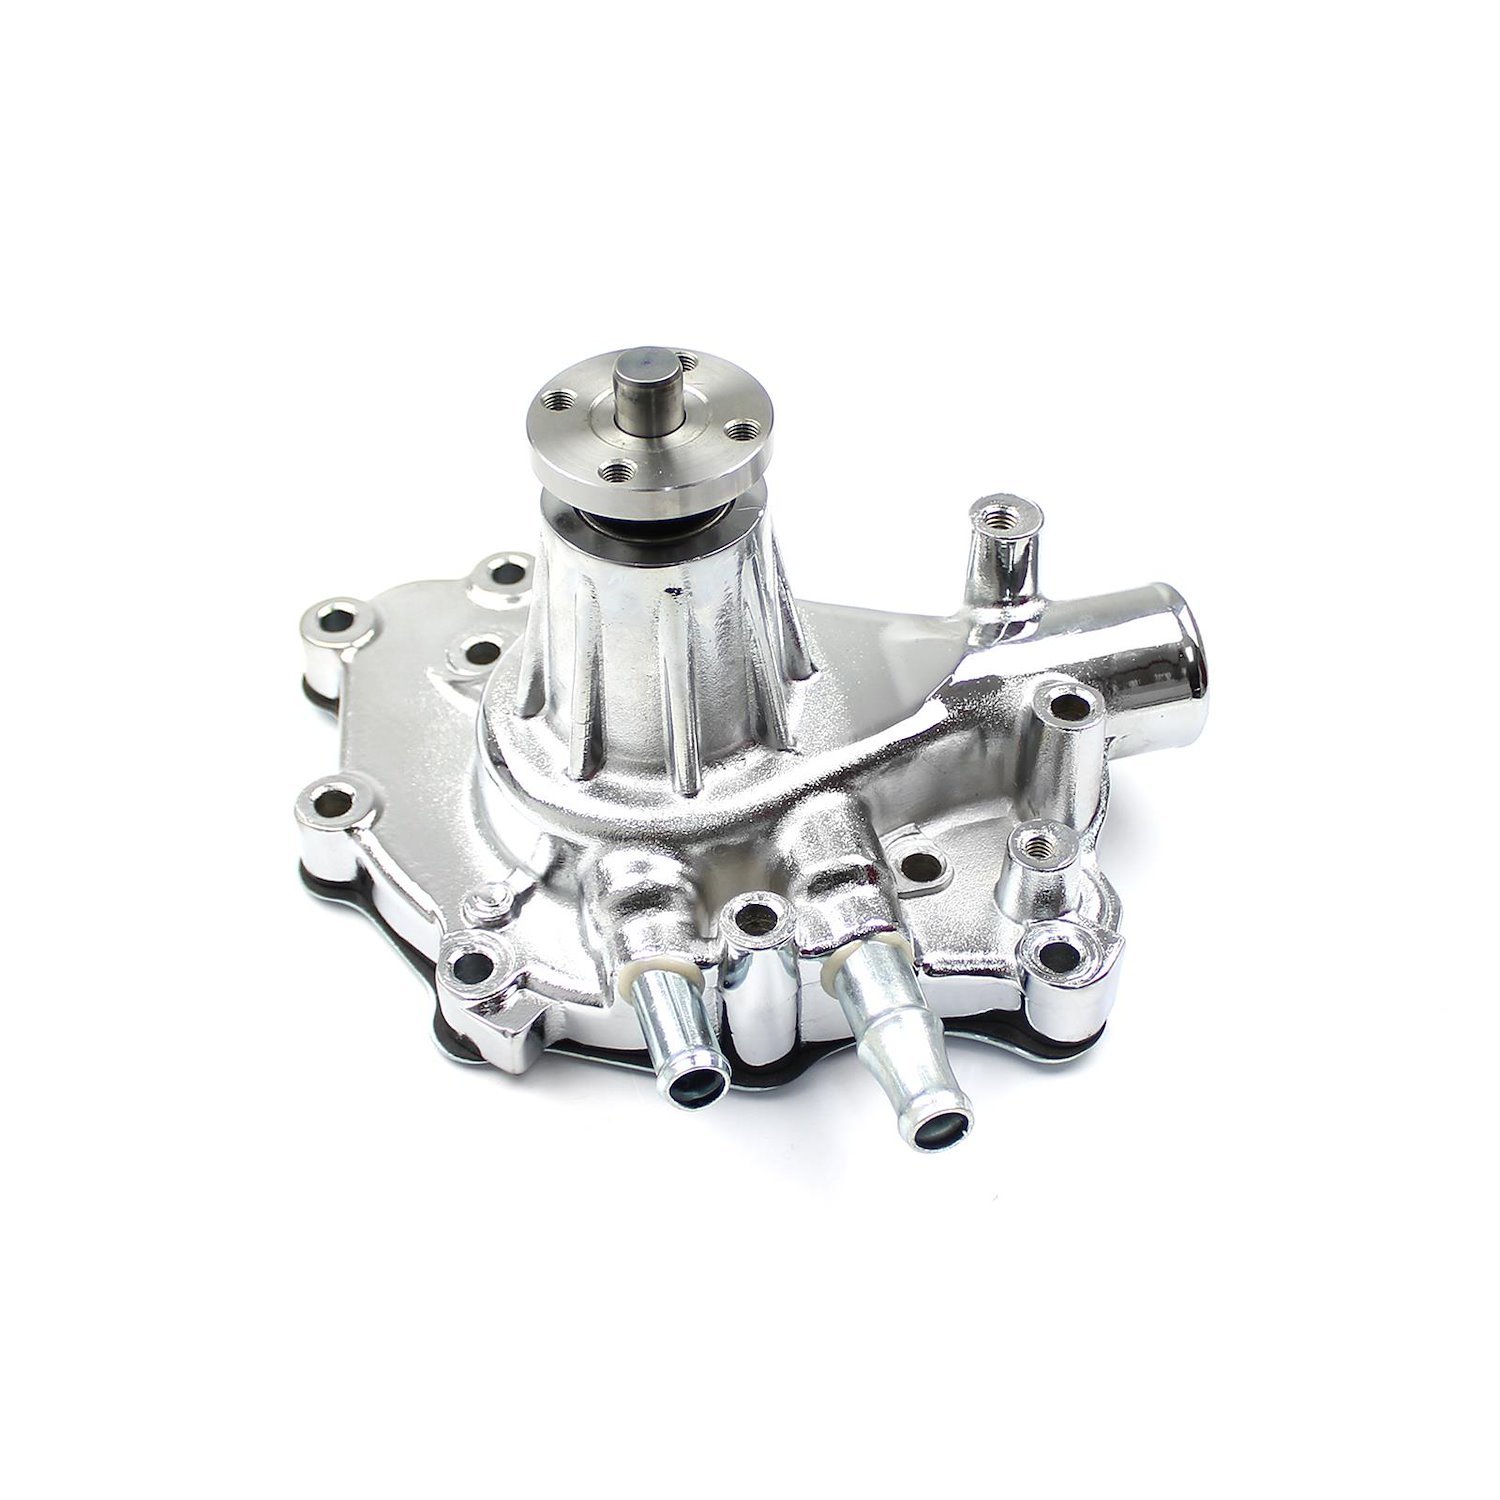 Aluminum Mechanical Water Pump for Small Block Ford 289, 302, 351 Windsor [Chrome Finish]